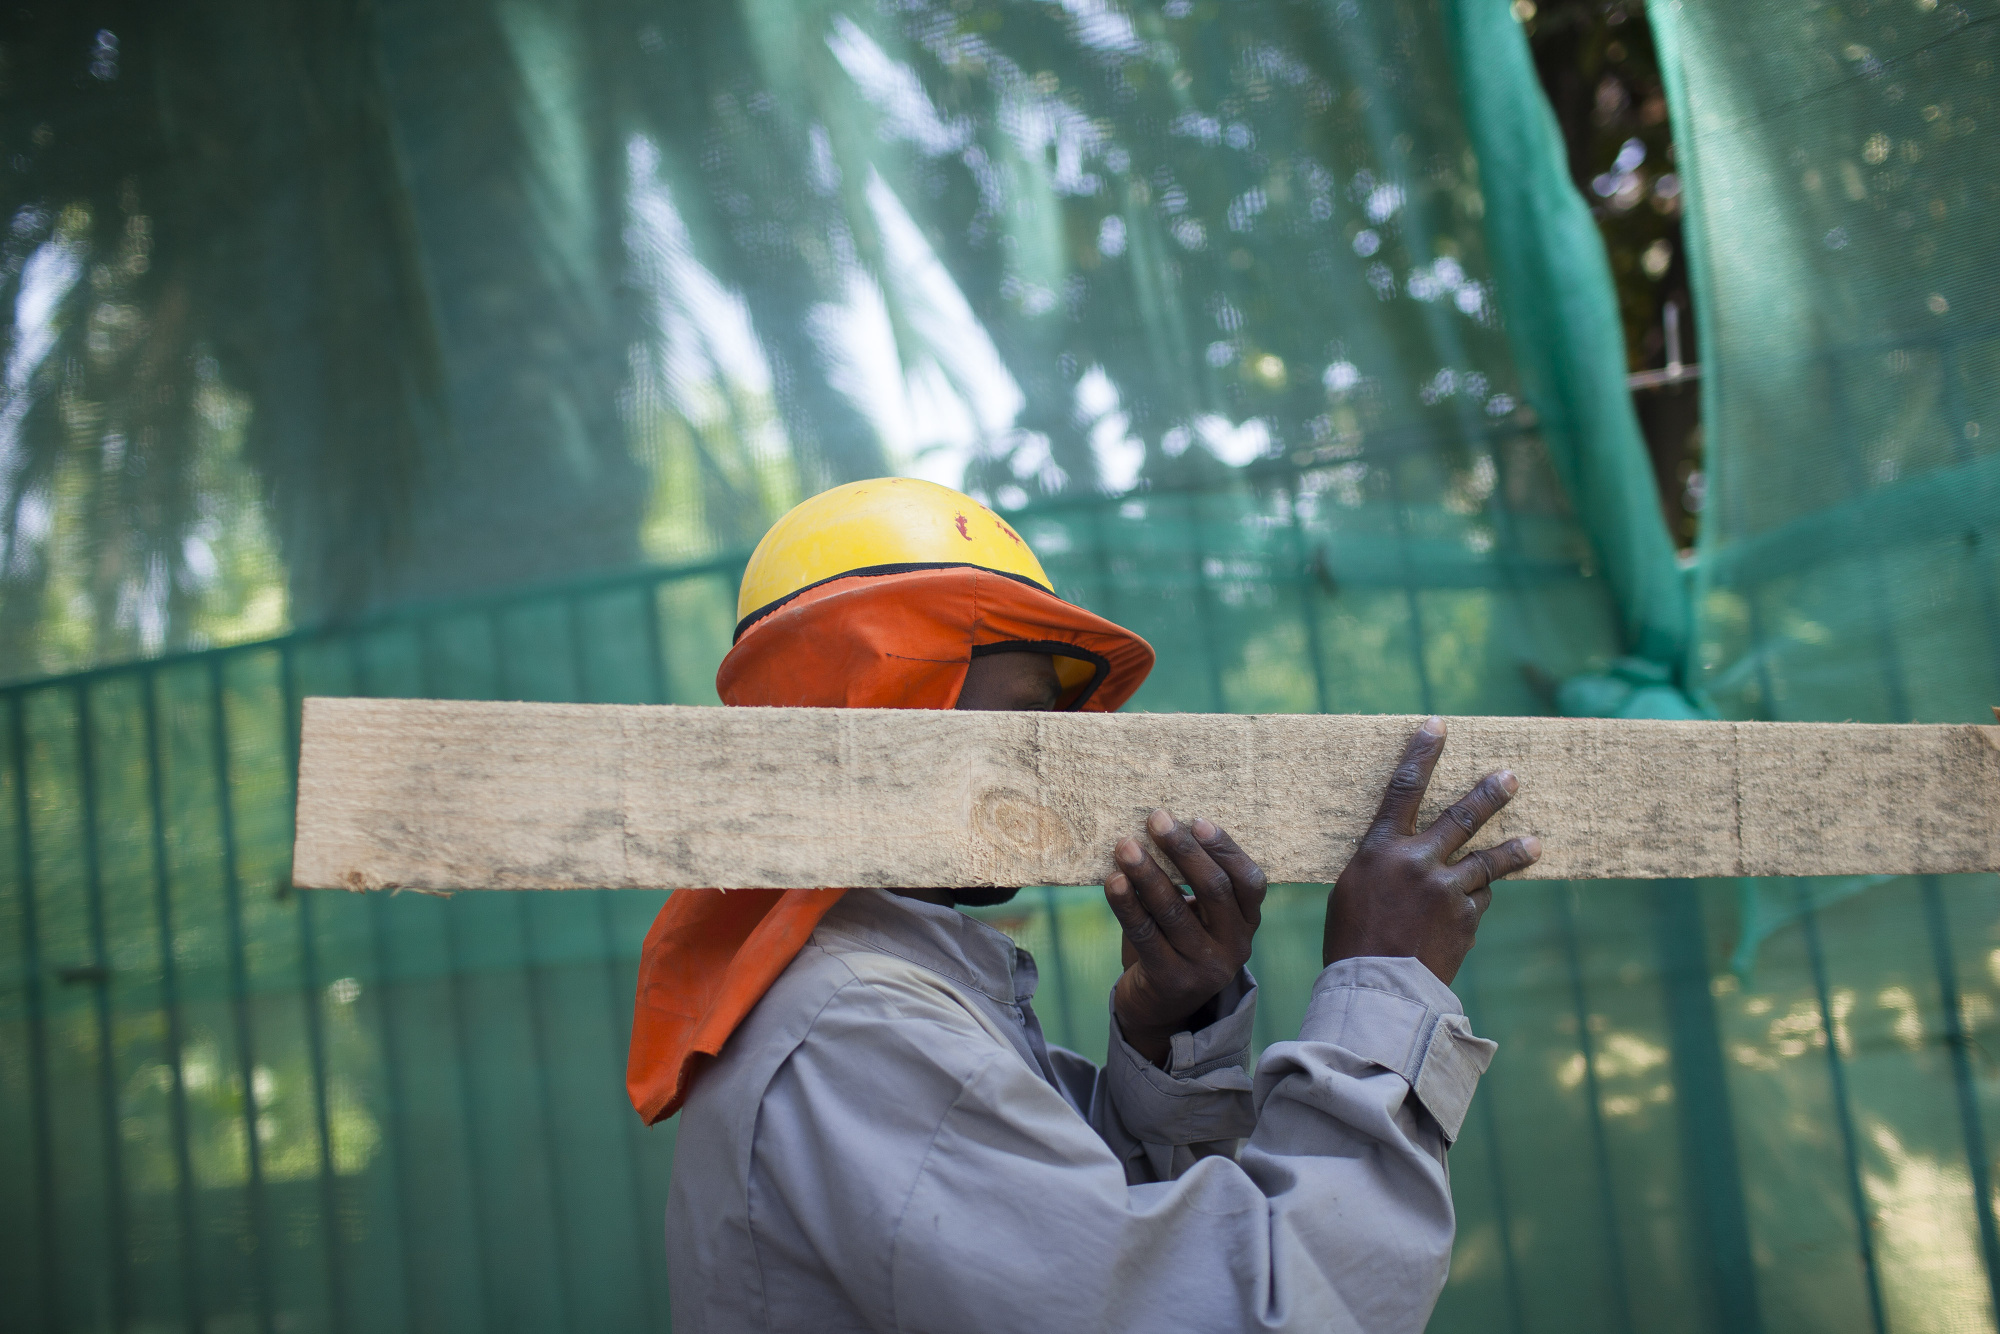 A Haitian man works at a building under construction in Santiago, Chile, on&nbsp;Nov. 10, 2016.